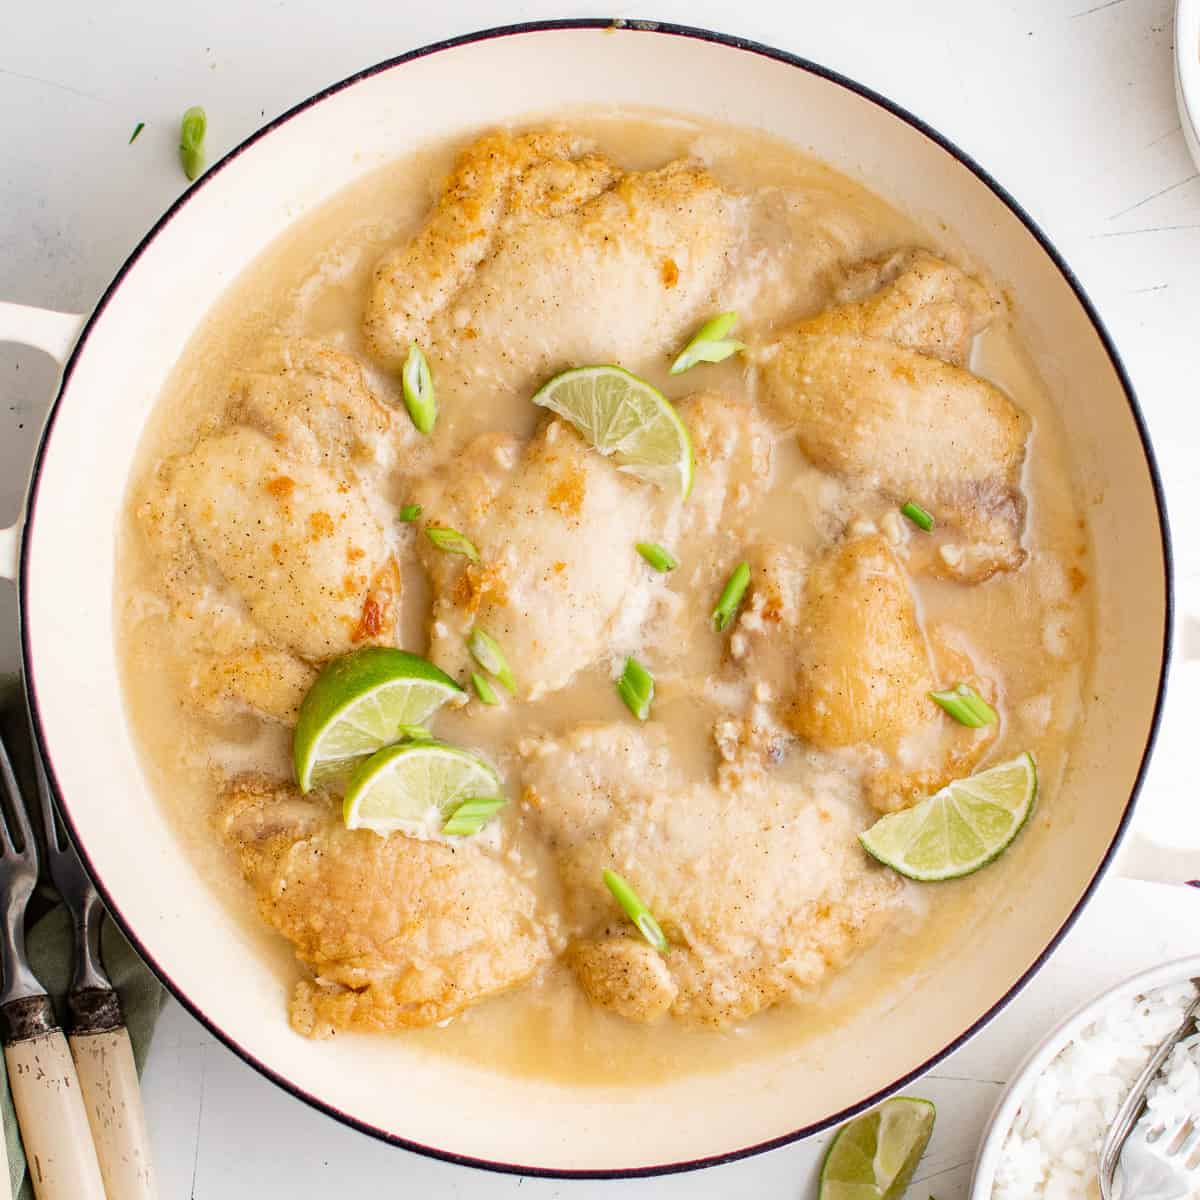 What to serve with coconut chicken